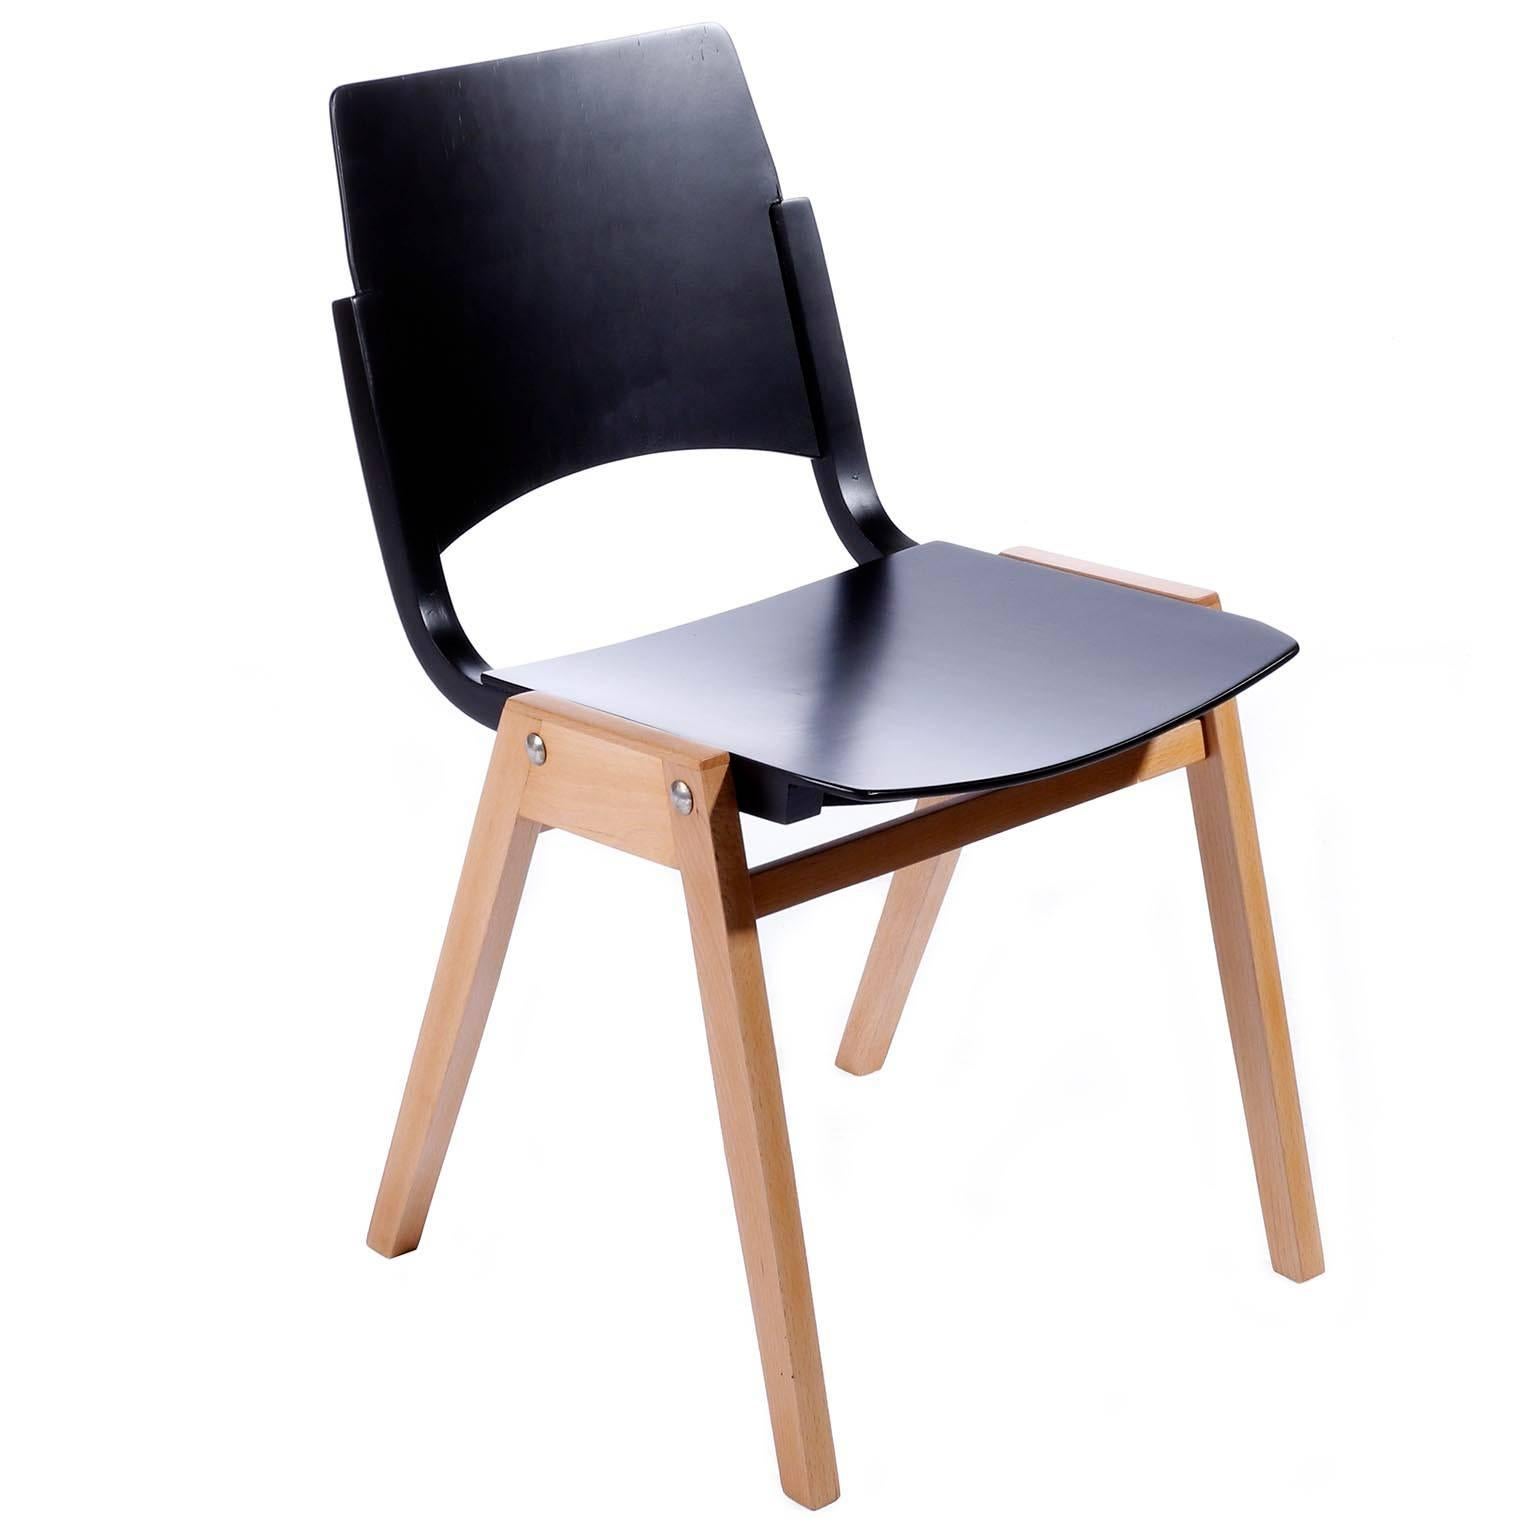 Painted One of Ten Roland Rainer Stacking Chairs P7, Bicolored Beech Black Austria, 1952